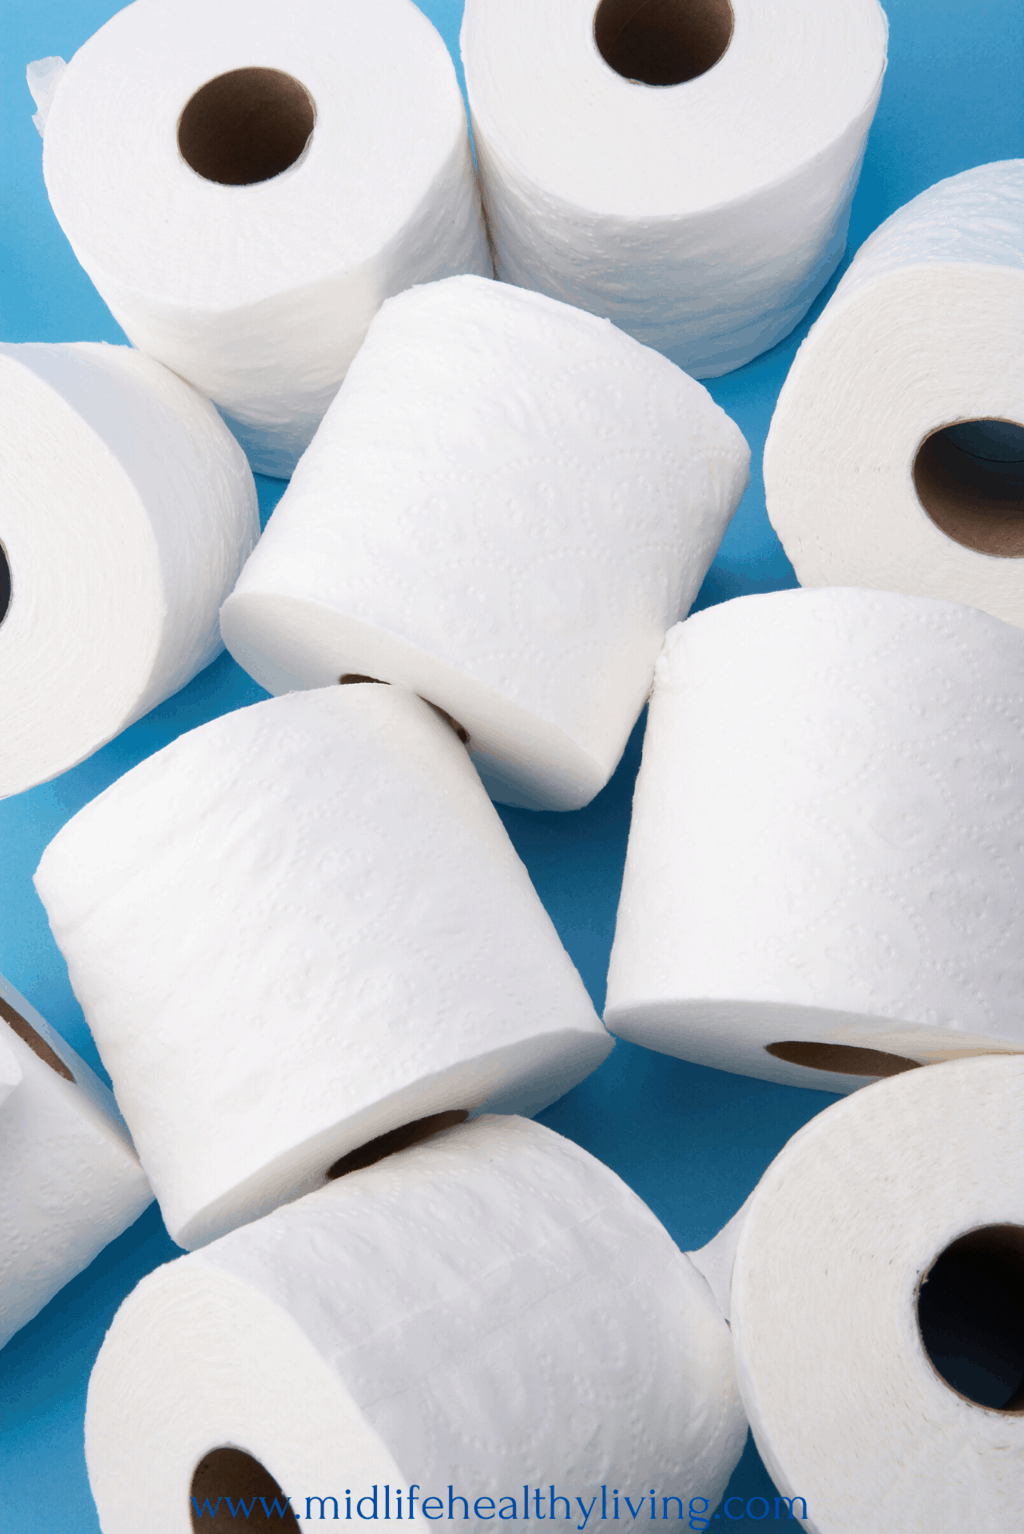 What to Do When You Run Out of Toilet Paper